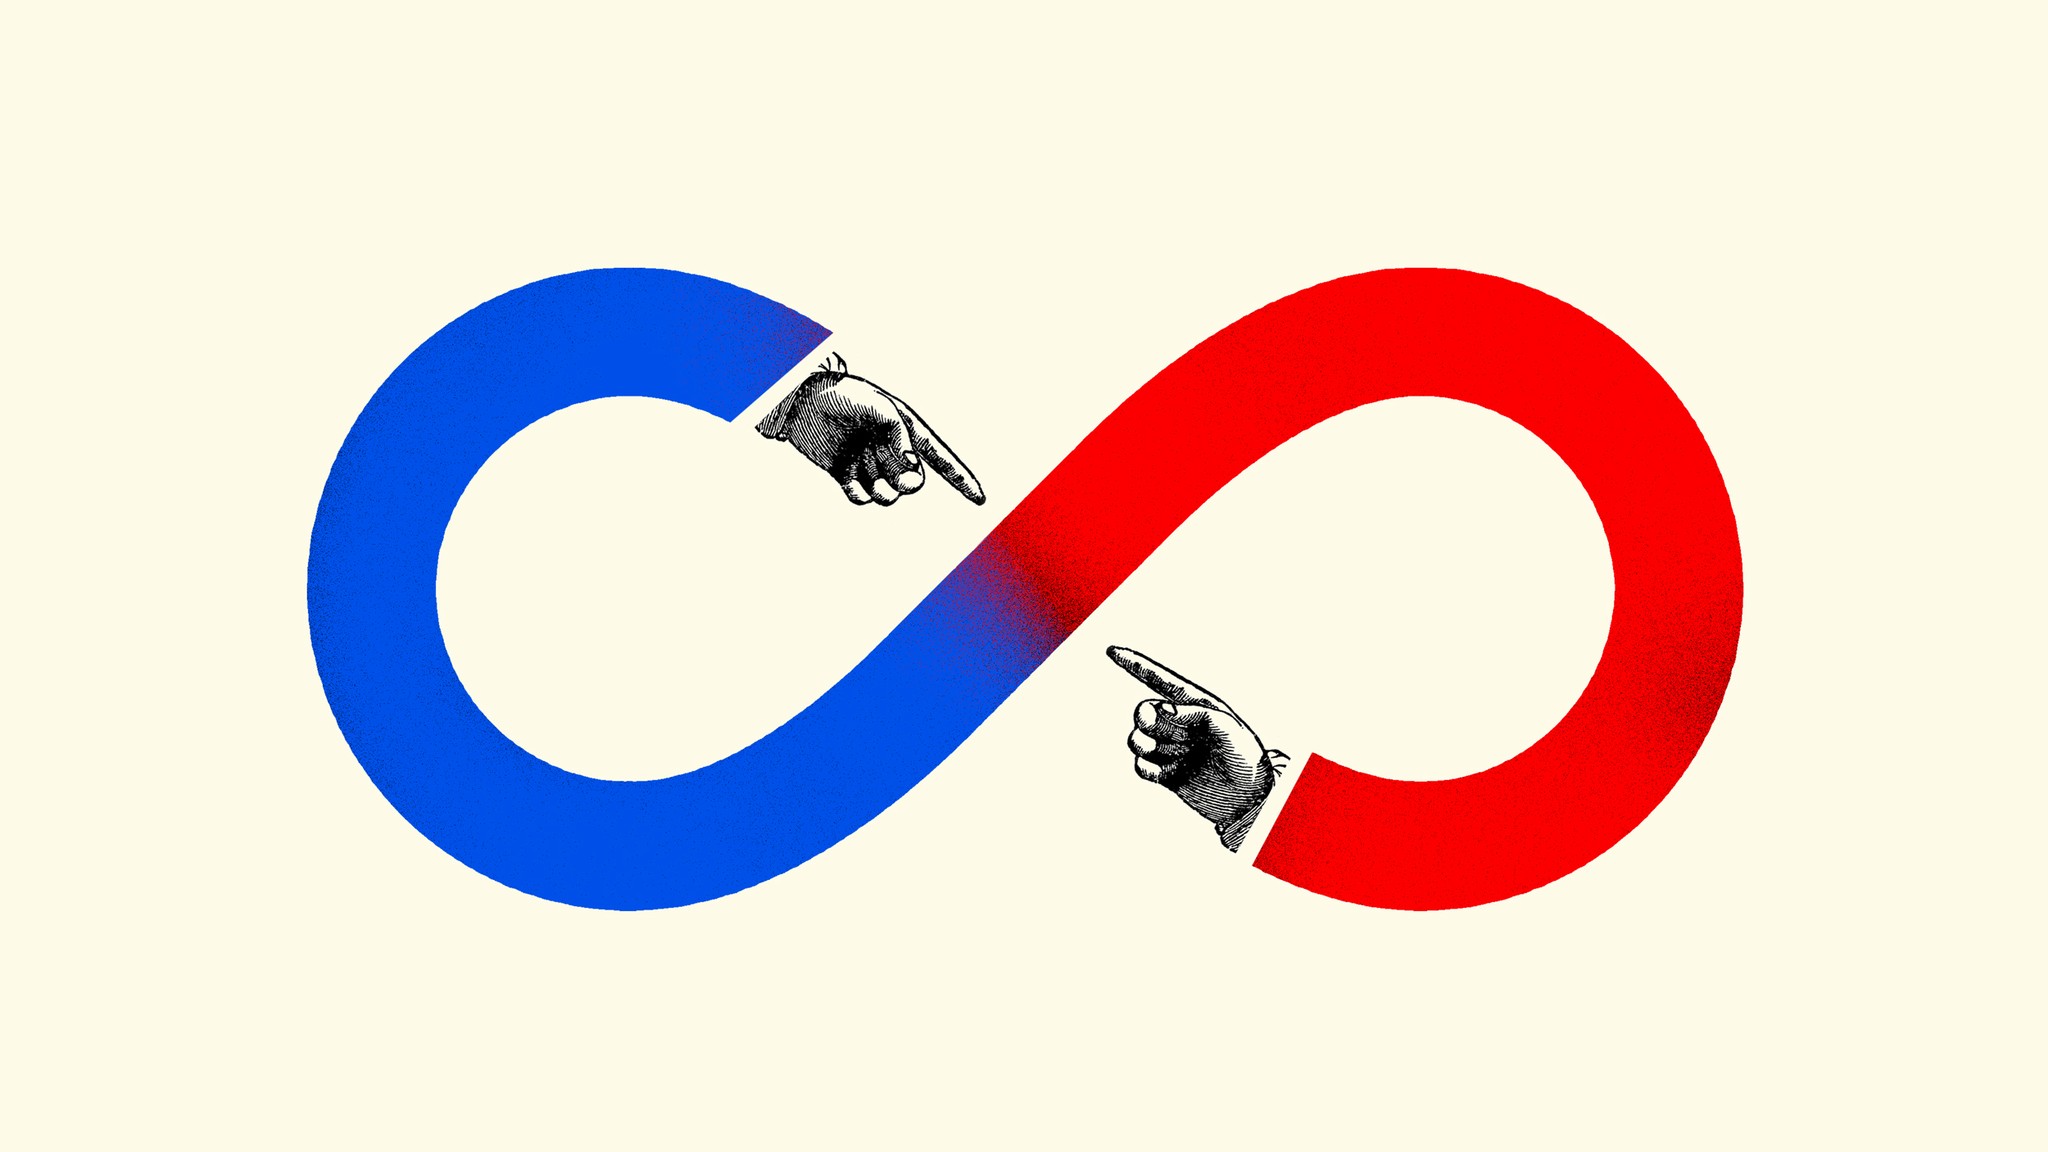 Illustration of one red arm and hand accusingly pointing at one blue arm and hand so that they form an infinity symbol of a figure 8 on its side